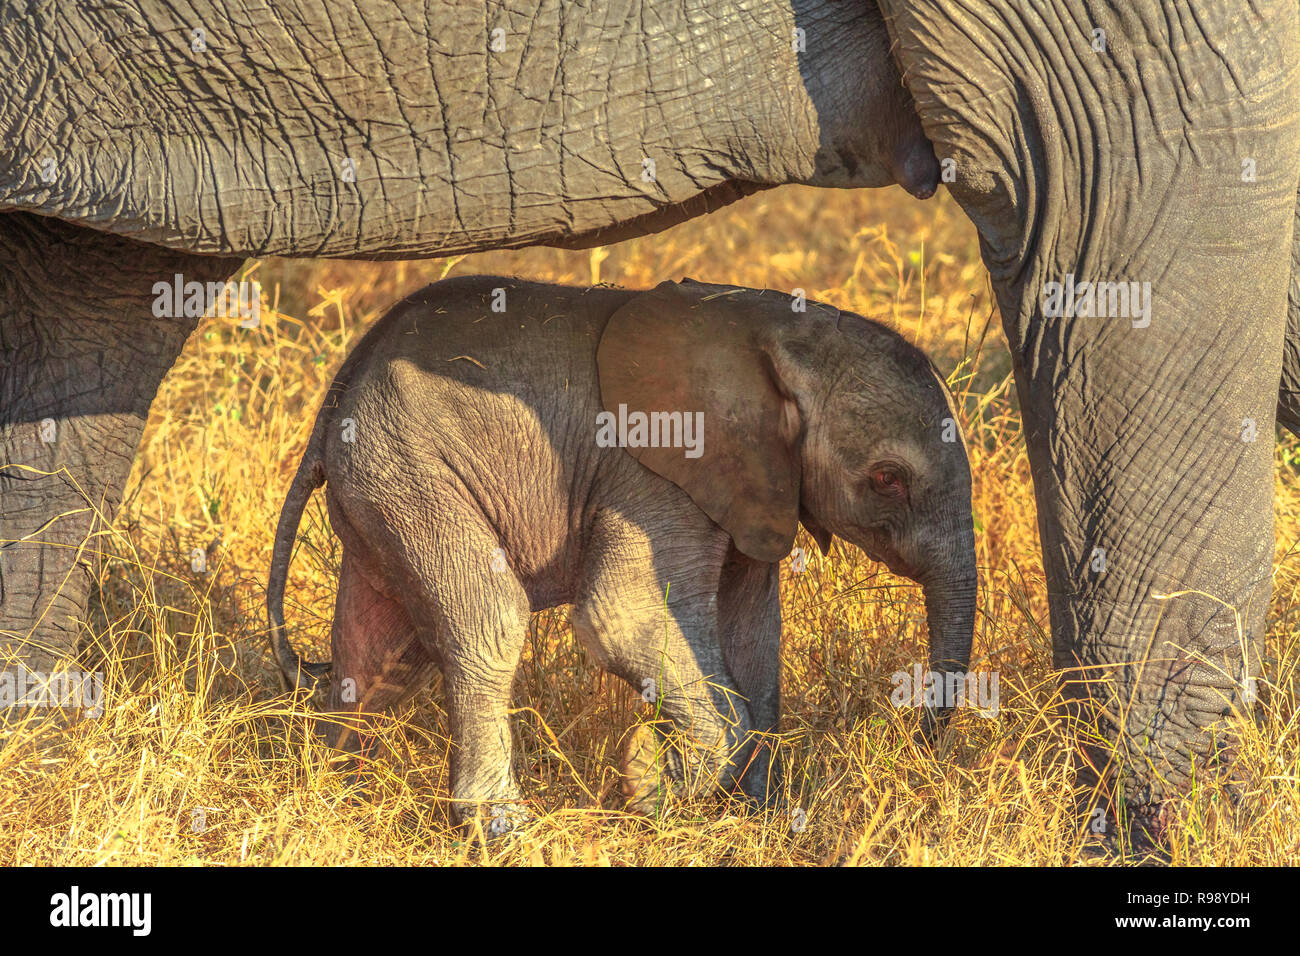 Elefant calf protected by mum. Safari game drive in Pilanesberg National Park, South Africa. The African Elephant is part of the Big Five. Stock Photo